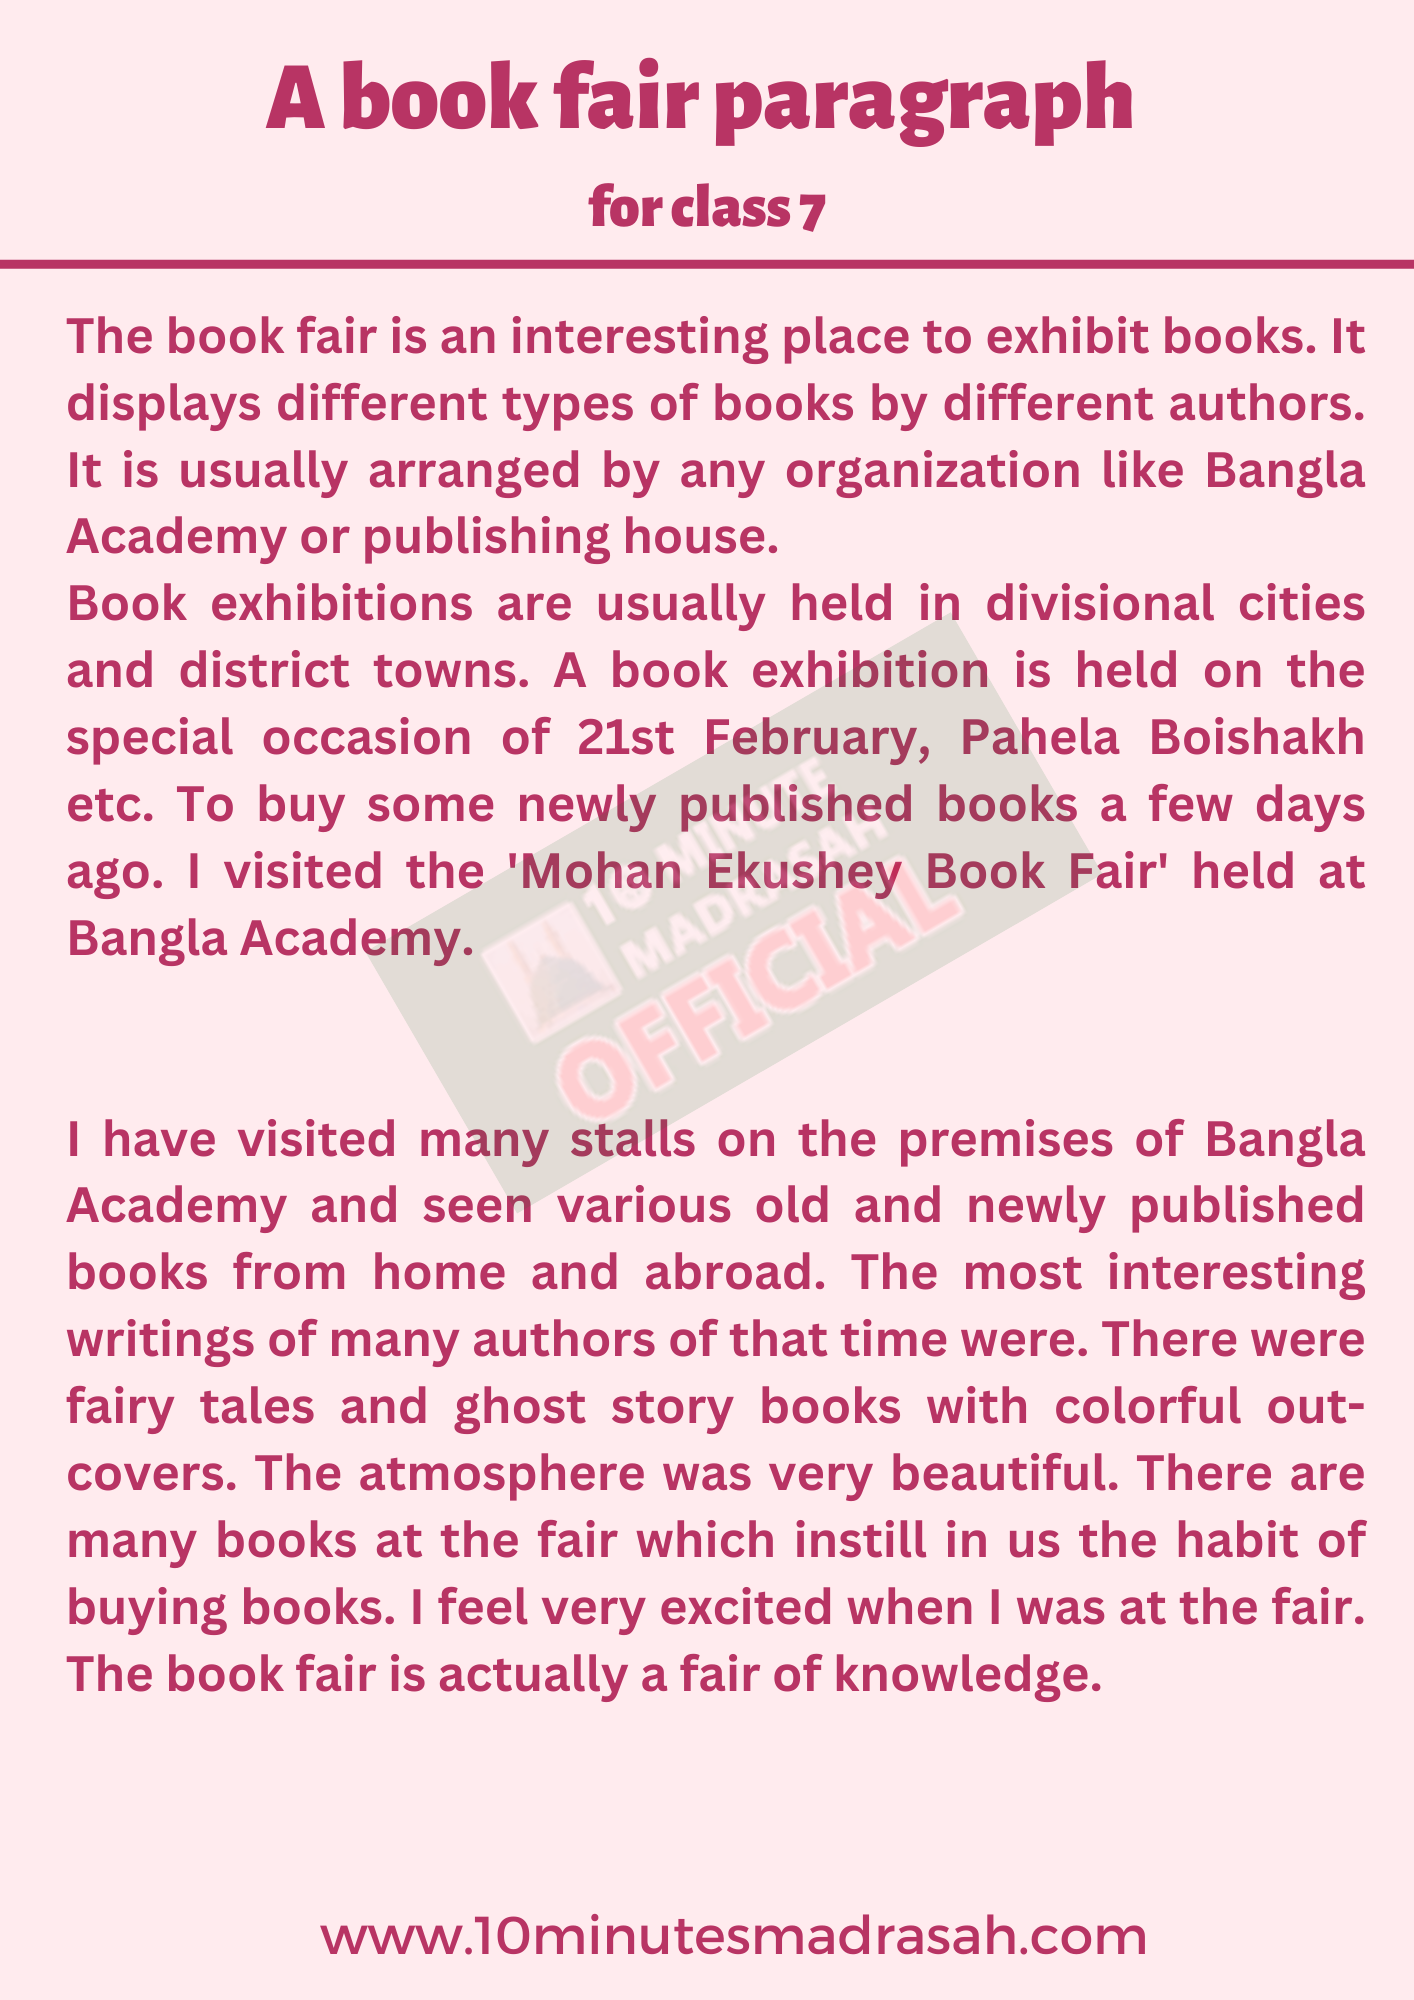 A book fair paragraph of 150 words for Class 7